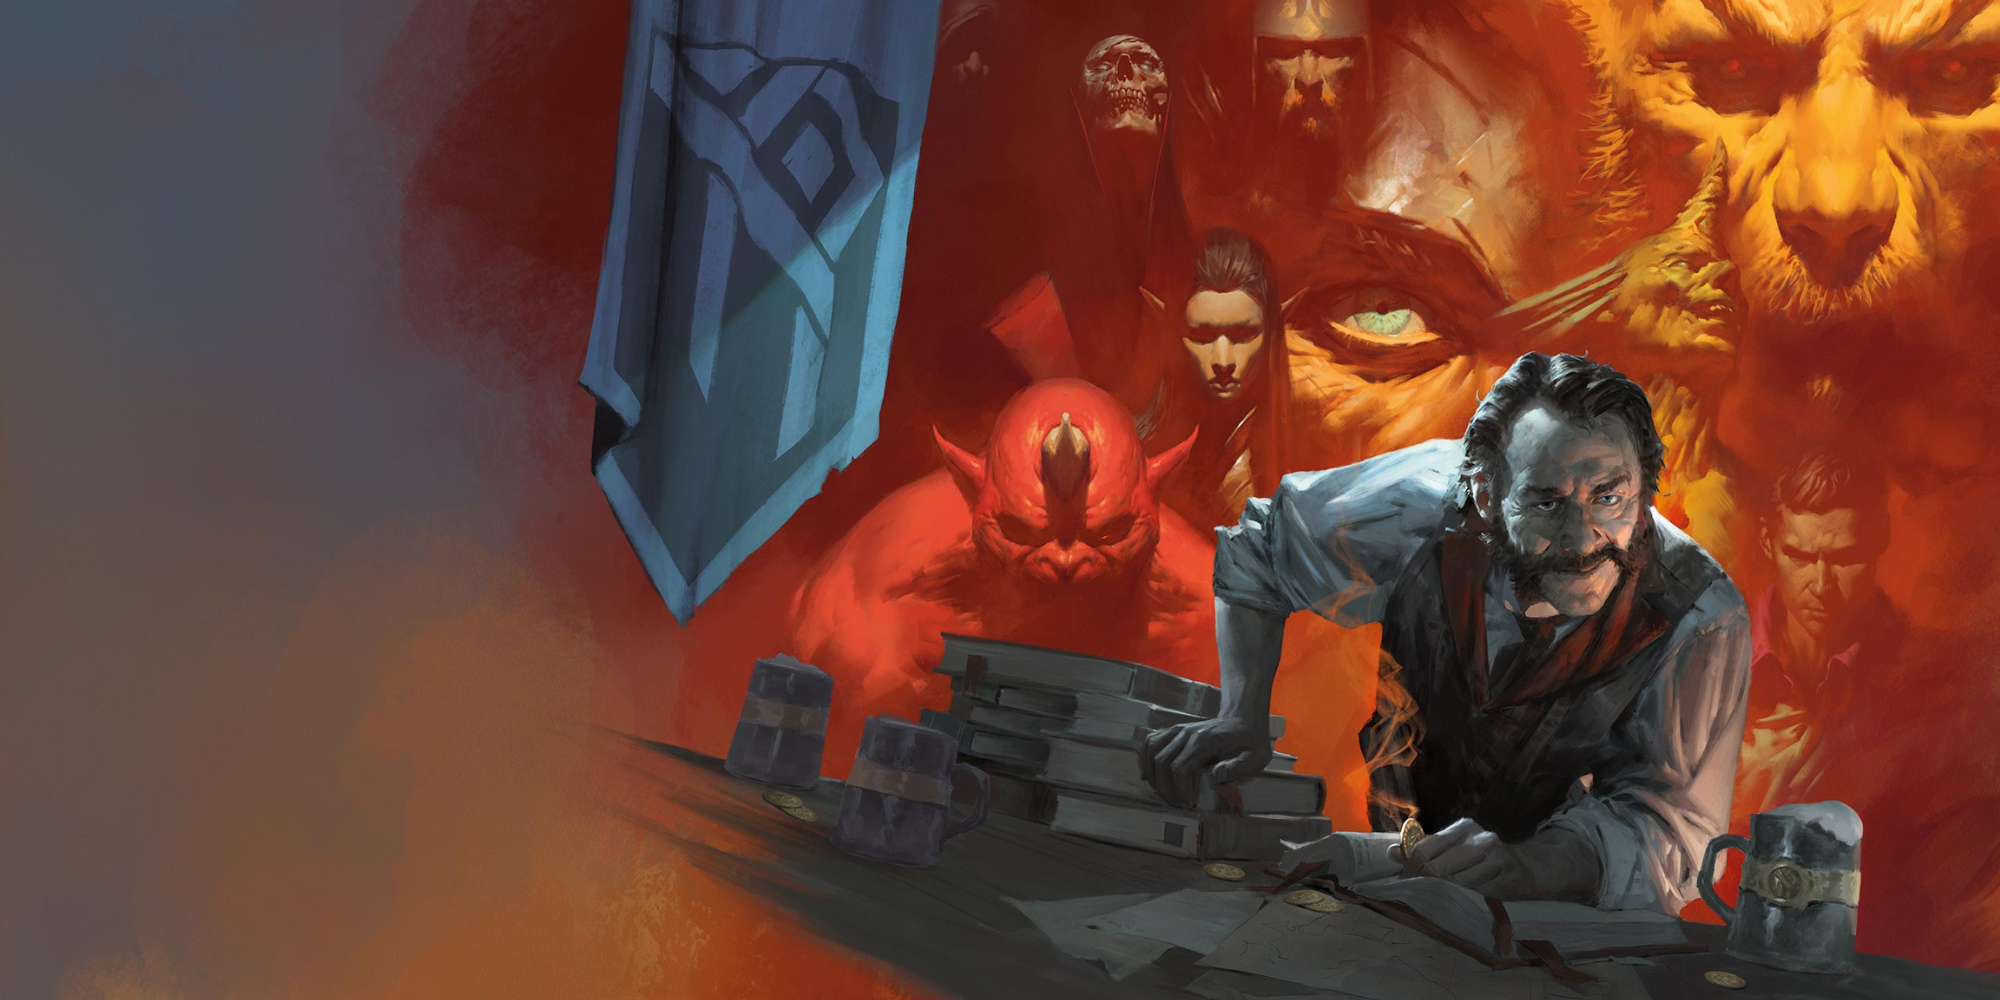 D&D Tales From The Yawning Portal Cover Art of the Landlord leaning over a desk with monsters looming behind him